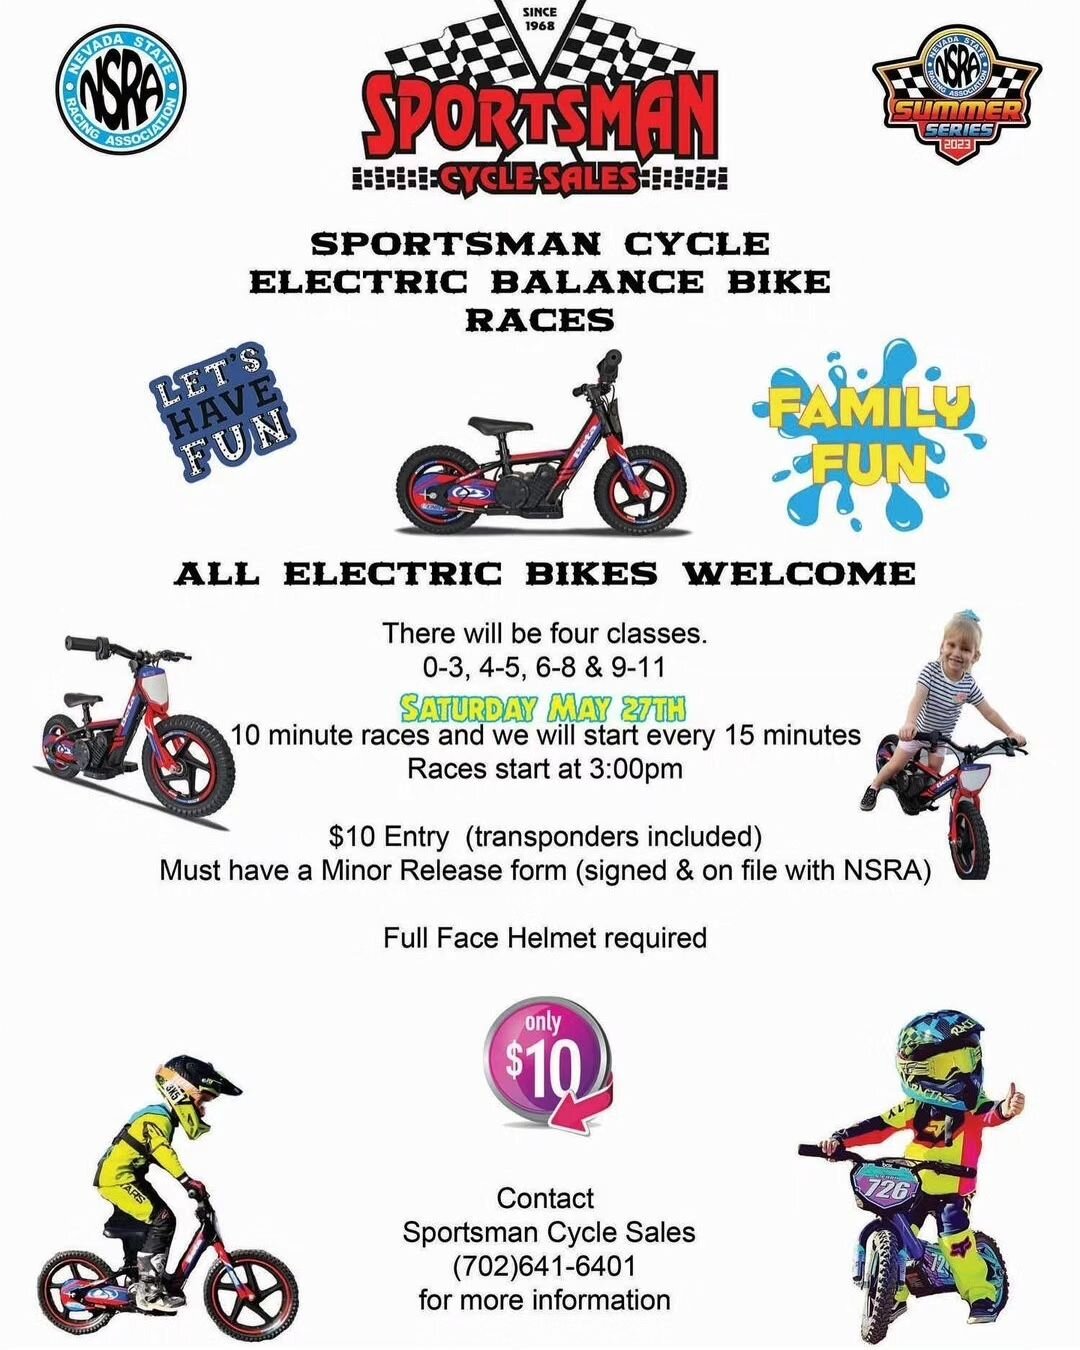 We are excited to announce that we will be putting on Youth Electric balance bike races at the @nevadastate_racingassociation races! 
&bull;
✔️Four classes by age 
✔️$10 entry 
✔️Full-face helmet required 
✔️Minor release form must be signed &amp; on